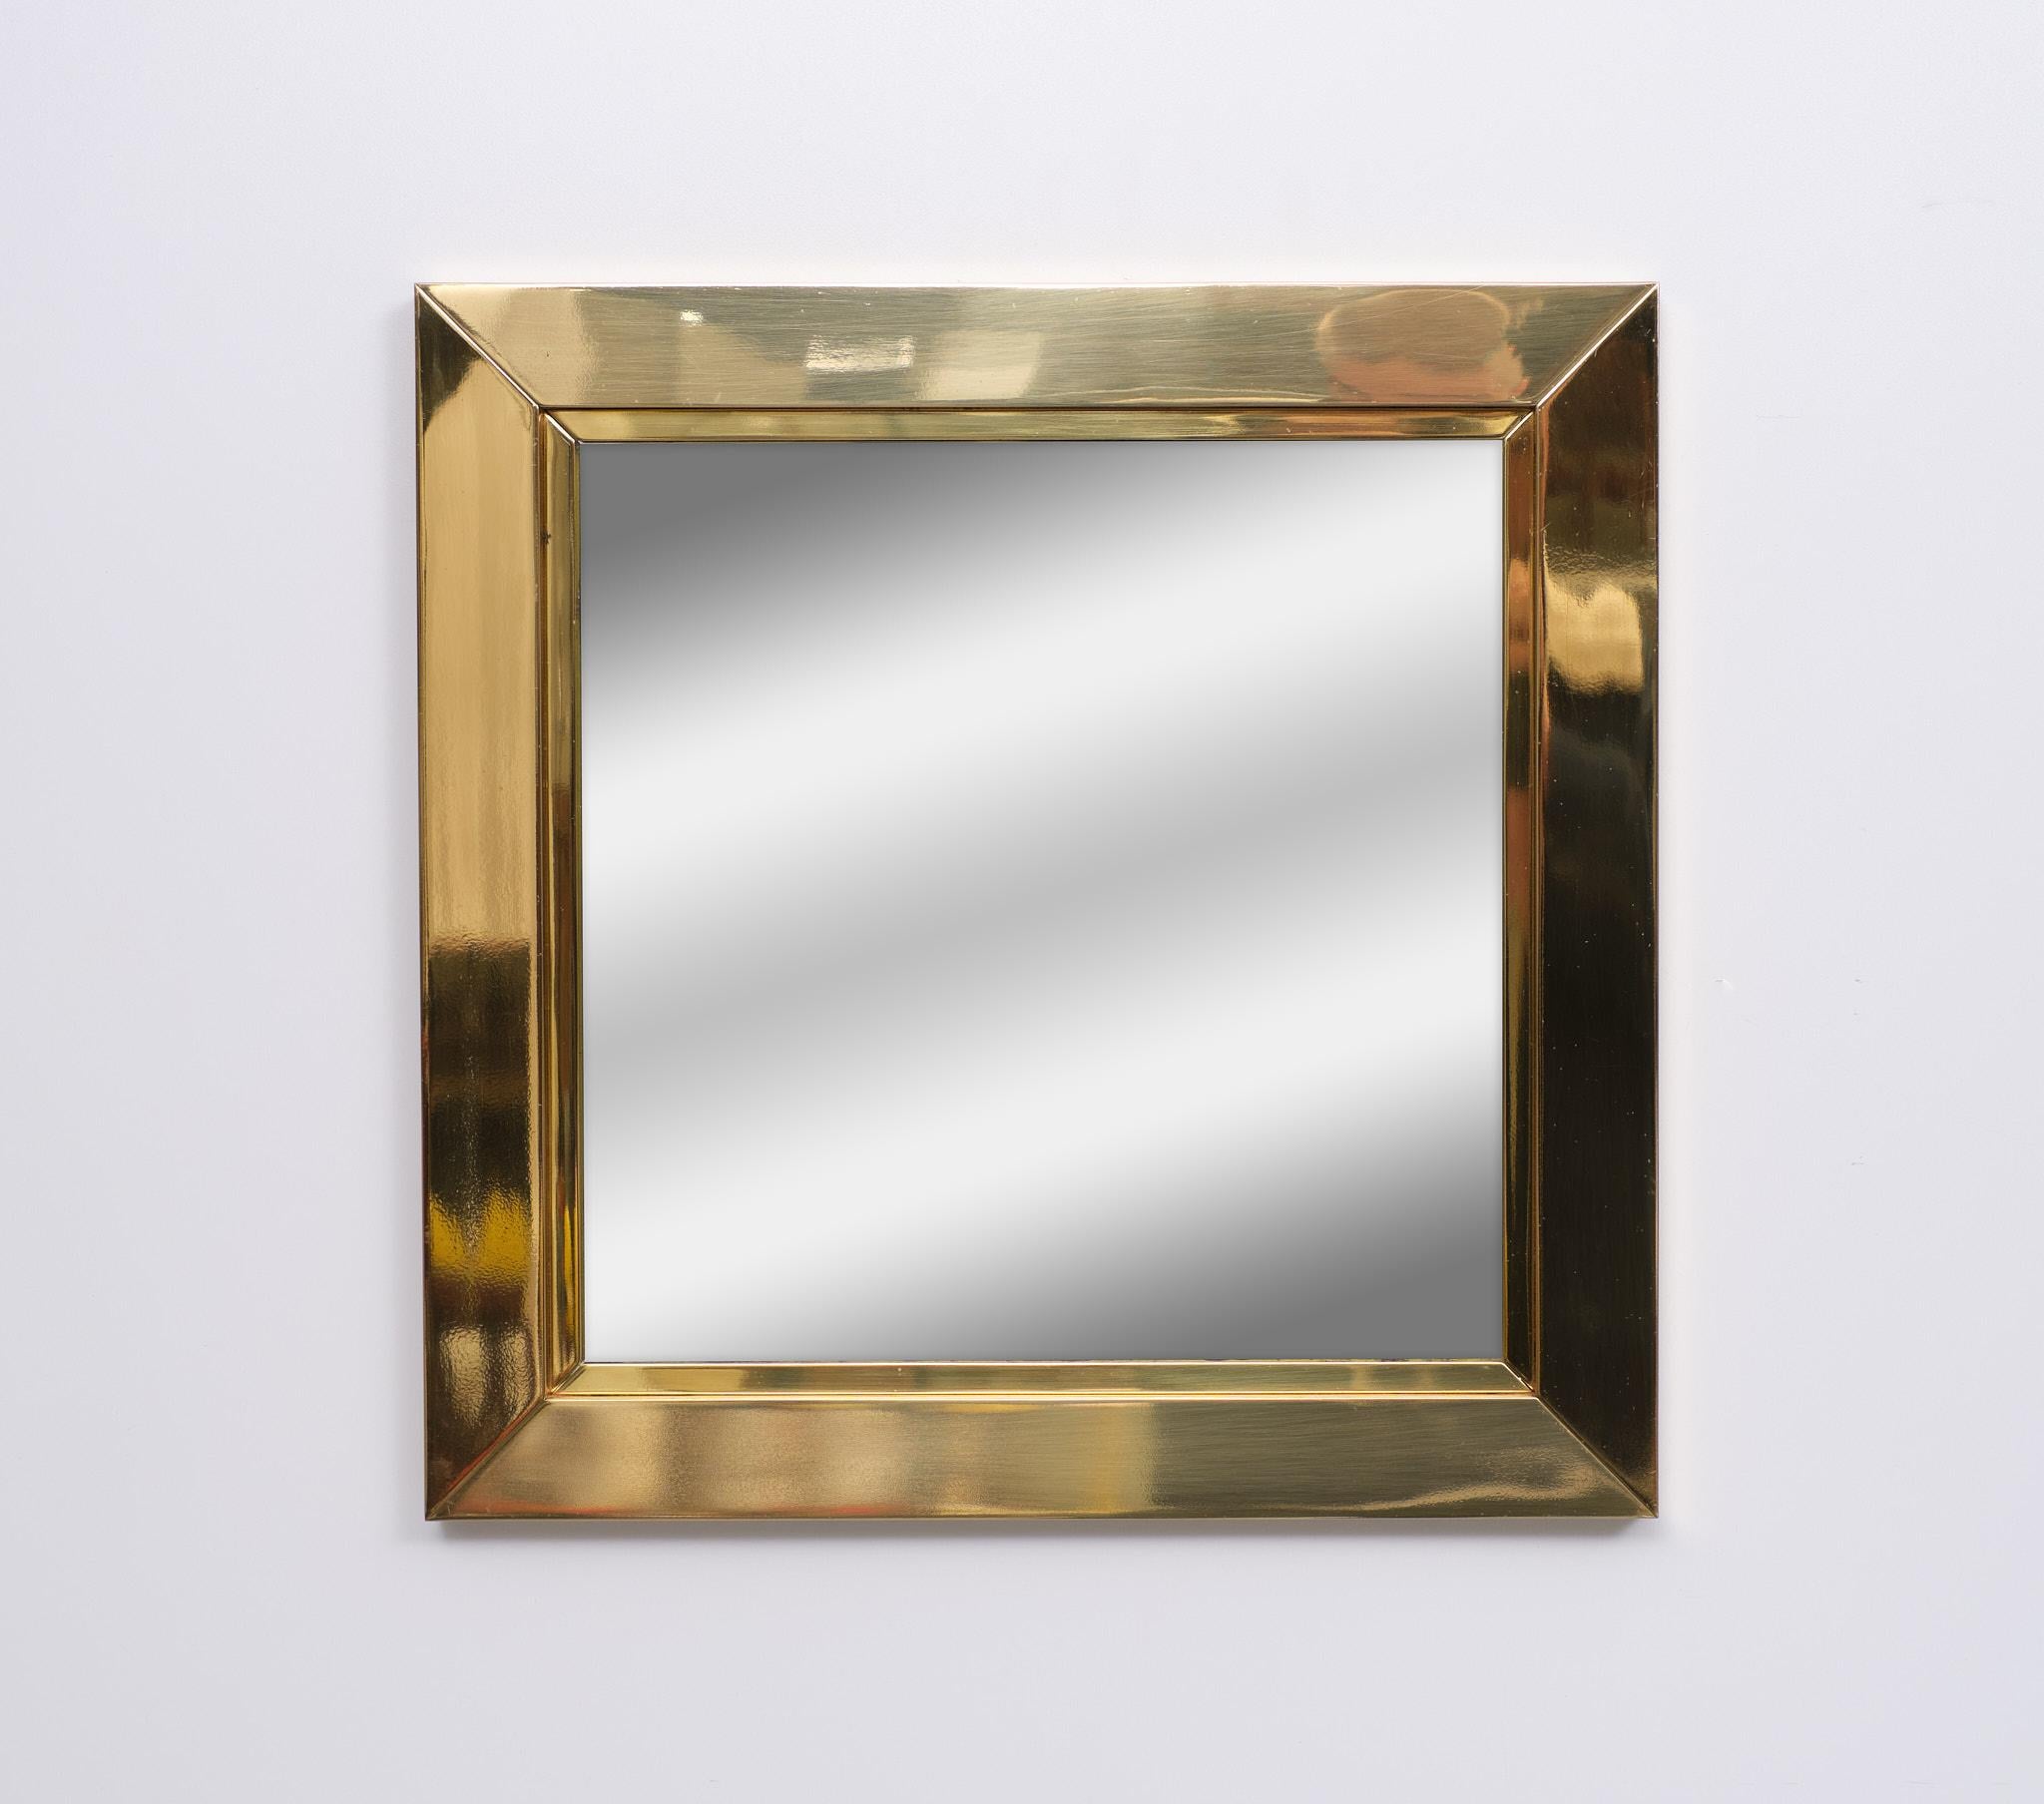 Hollywood Regency Brass Mirror Attributed to Willy Rizzo 1970 Italy For Sale